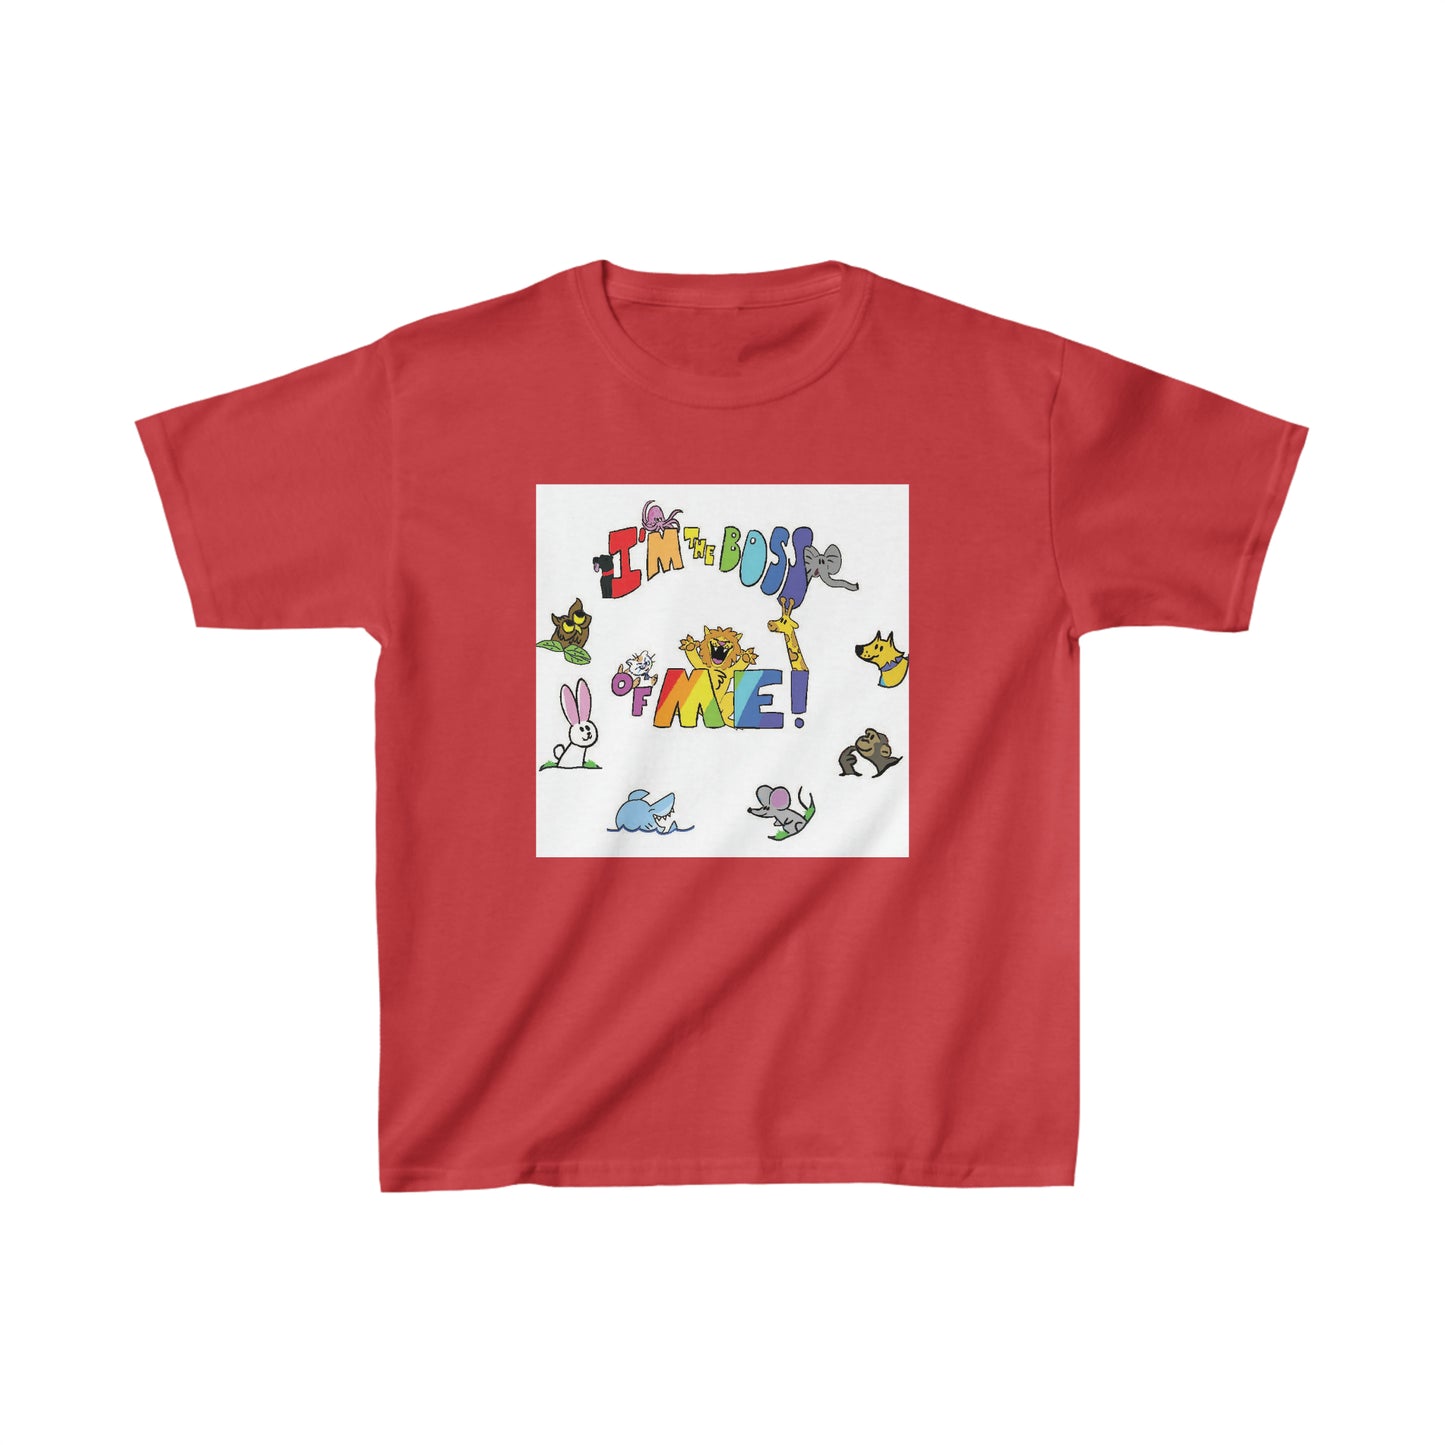 ITBOM Animals - Boss Big Kids Regular Fit Heavy Cotton Short Sleeve Tee XS-XL in 7 different Boss-Some colors